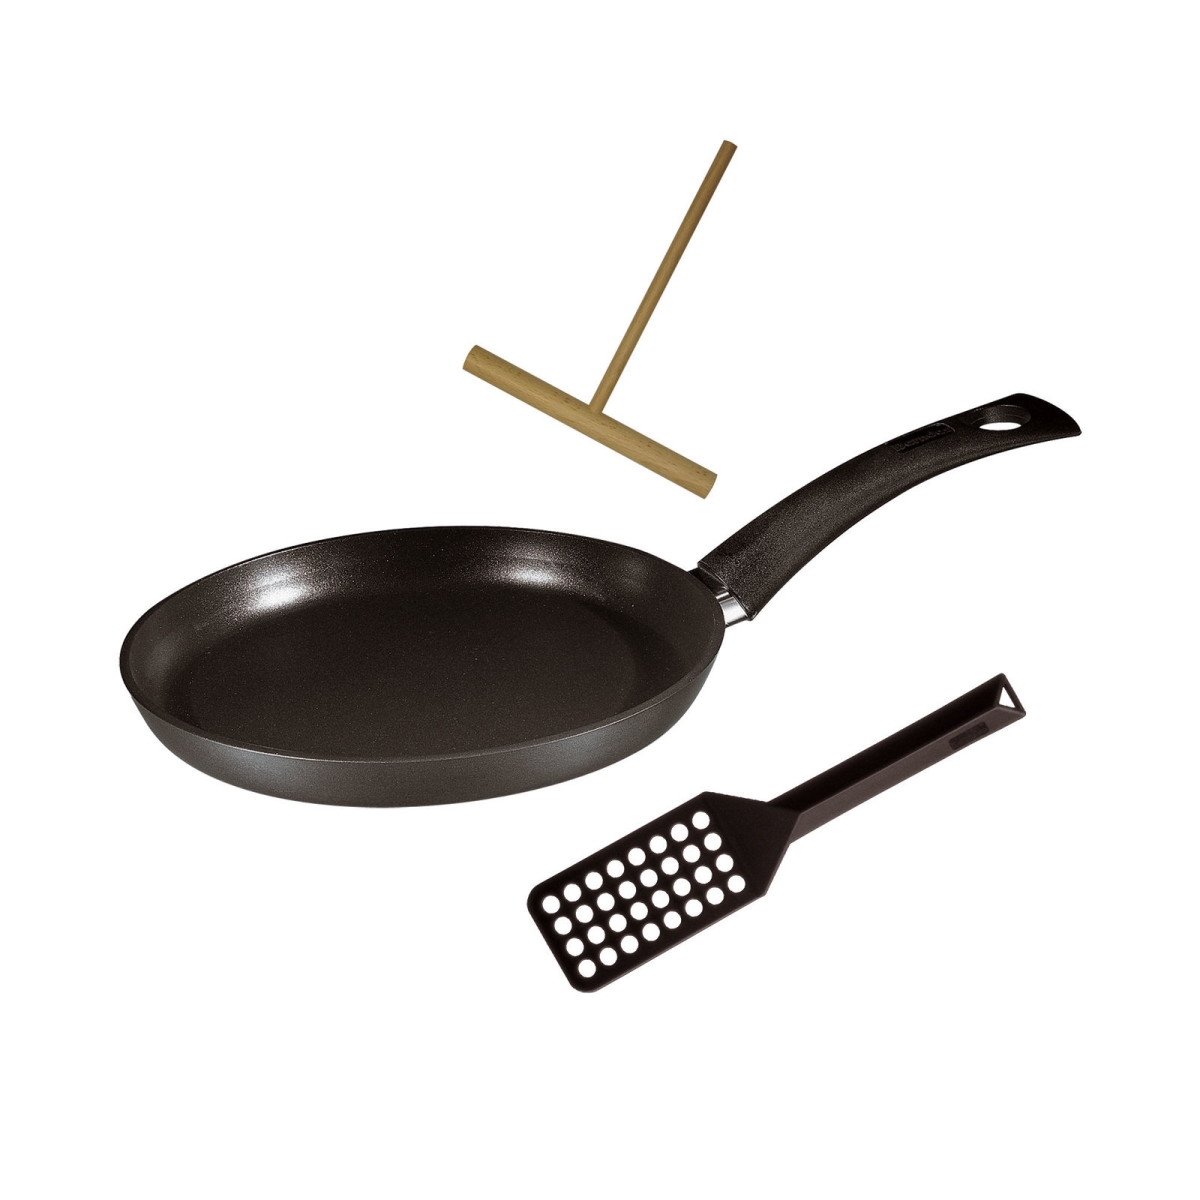 579865t 9.5 In. Specialty Crepe Pan With Tools